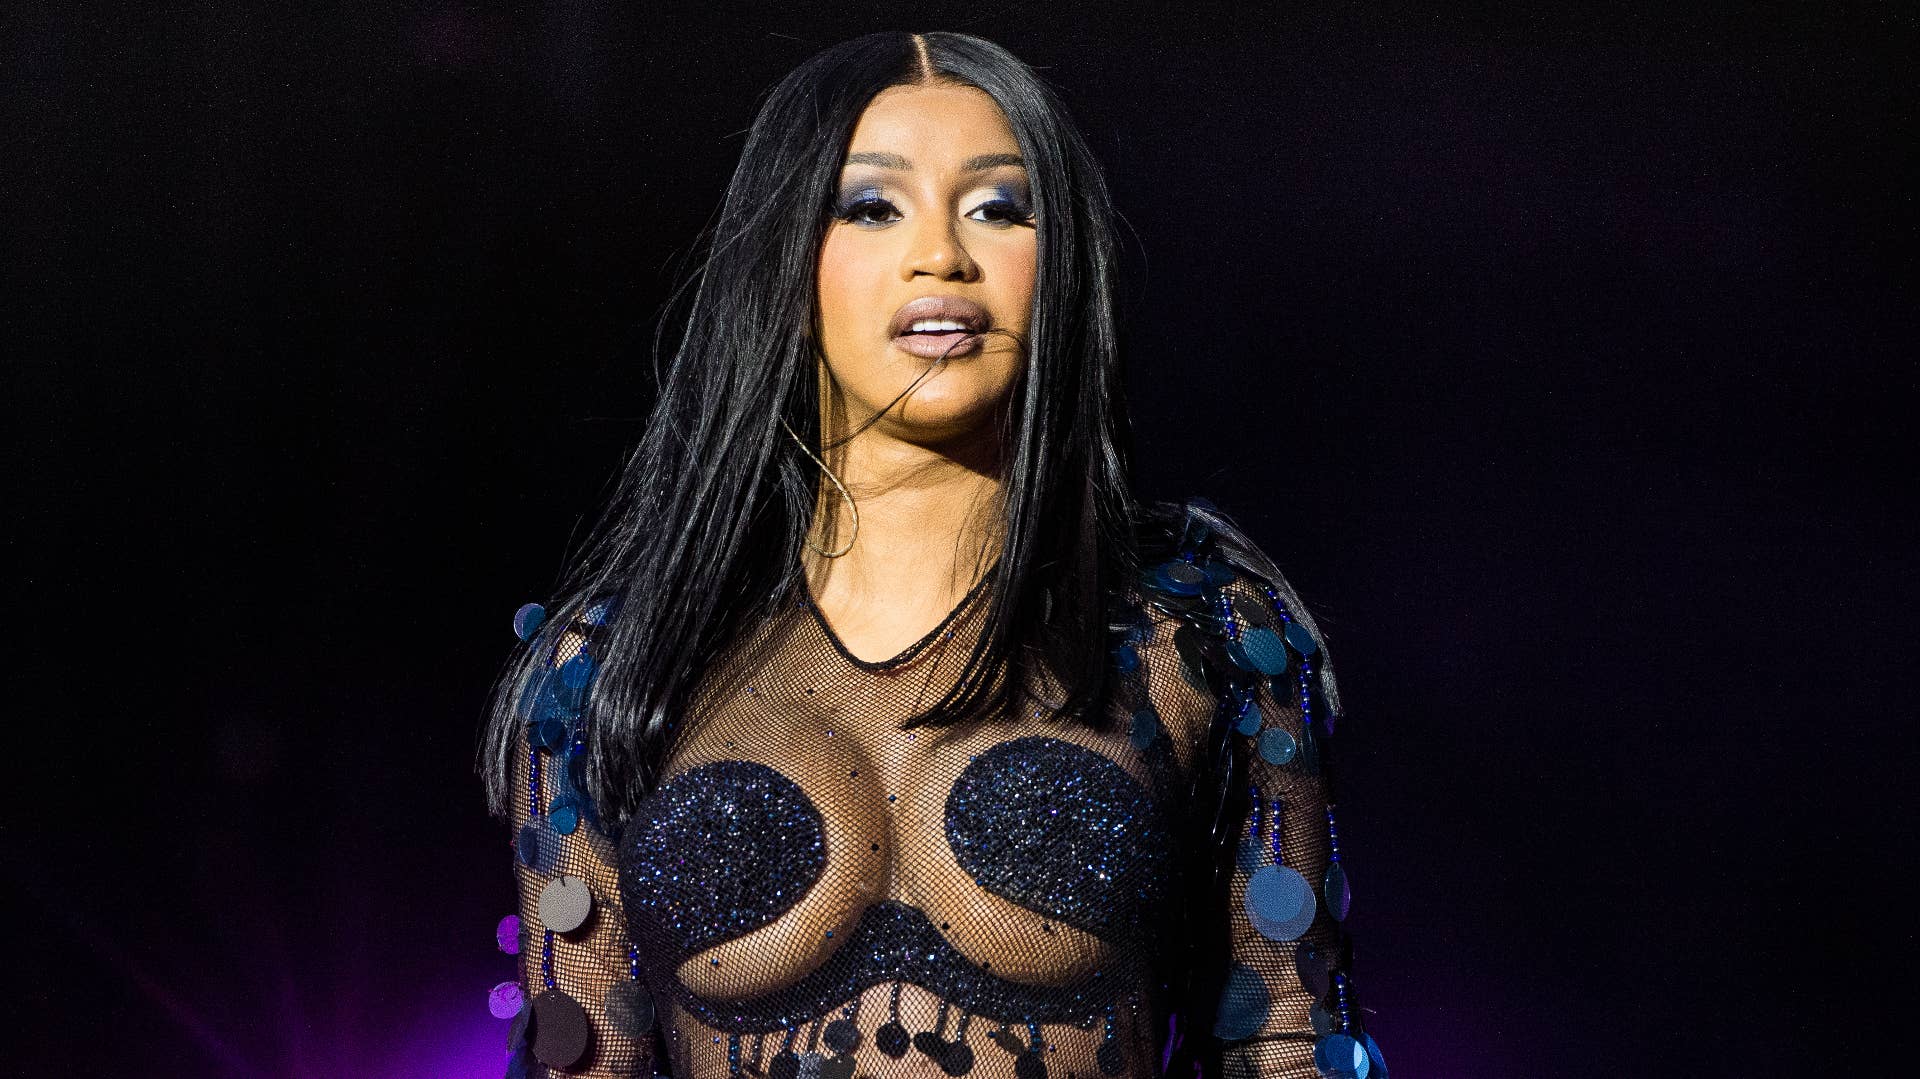 Cardi B photographed while performing onstage at a festival.